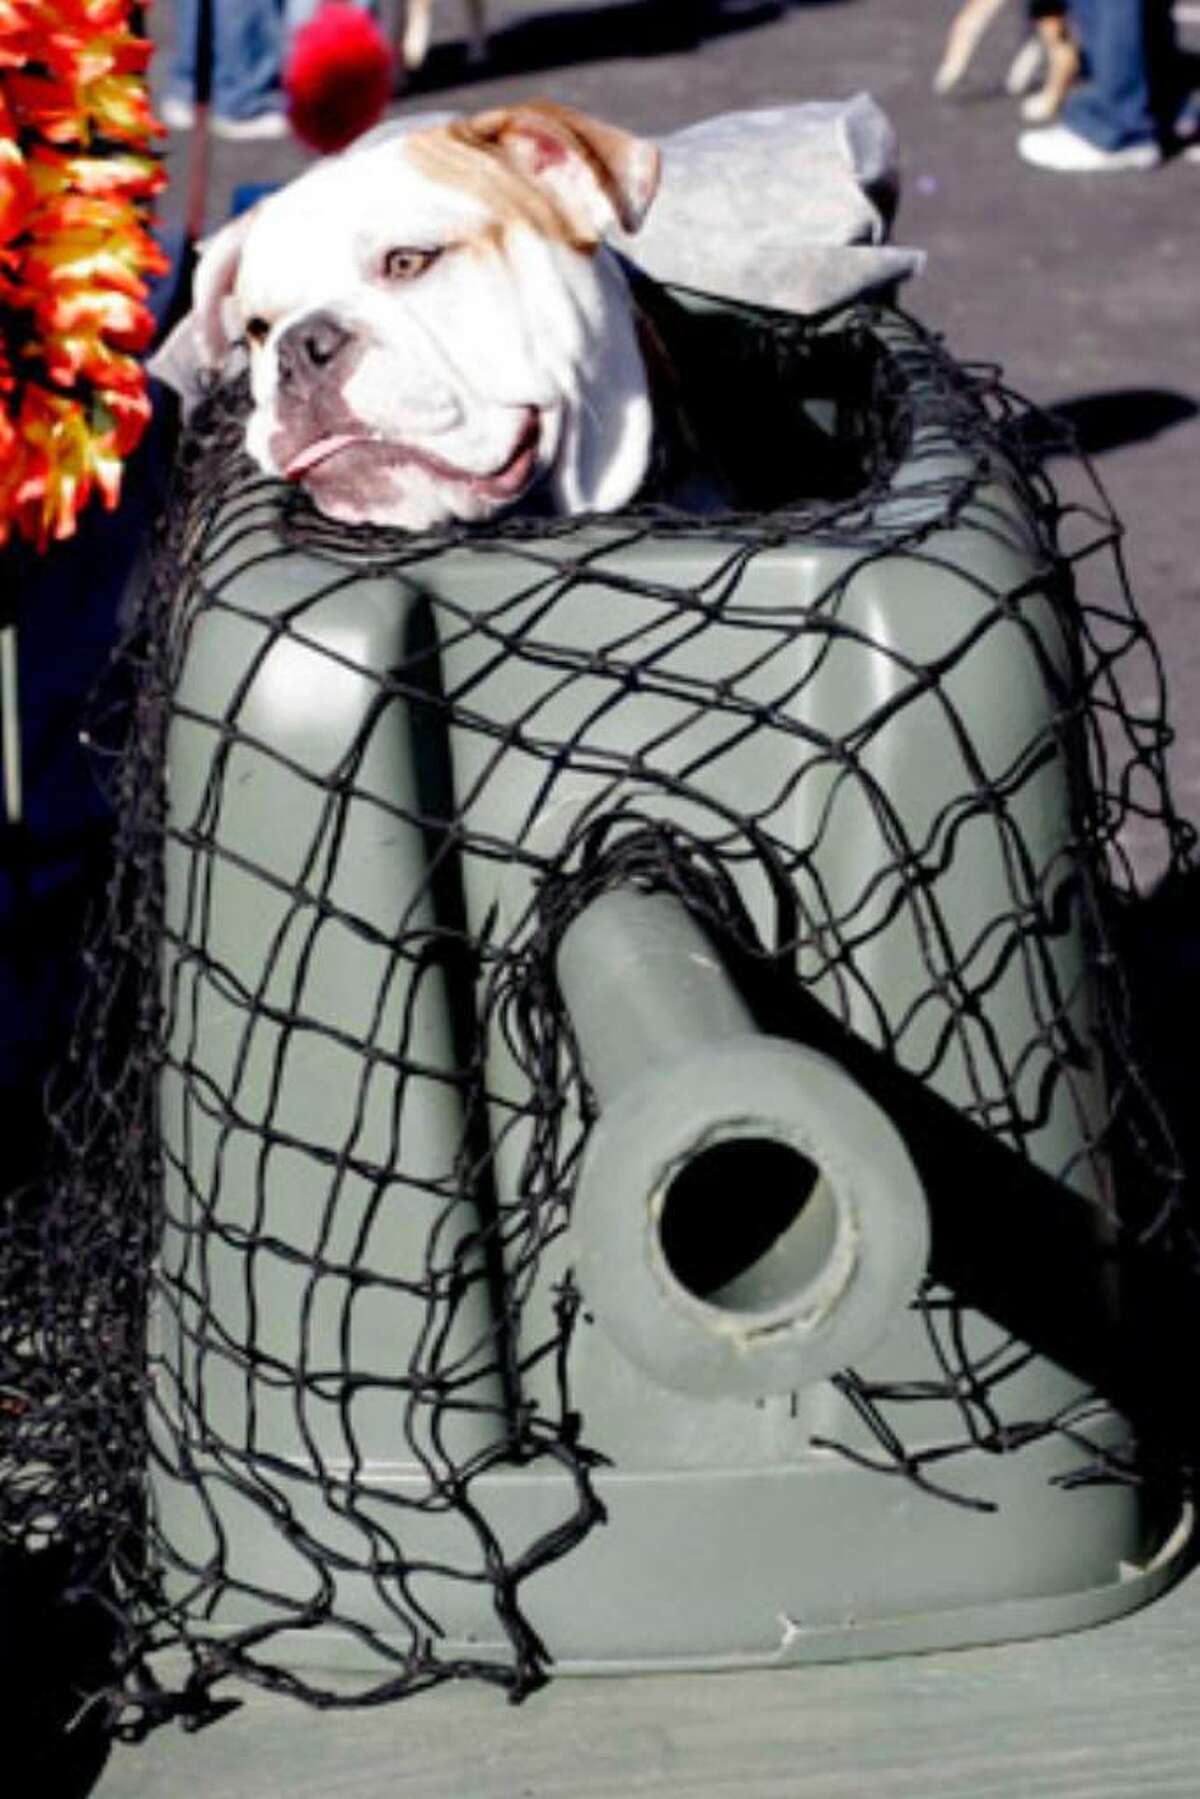 Bruce, a 9-month-old English bulldog, looks out from his doggie tank turret after competing in the costume contest at the 12th annual Pooch Parade.